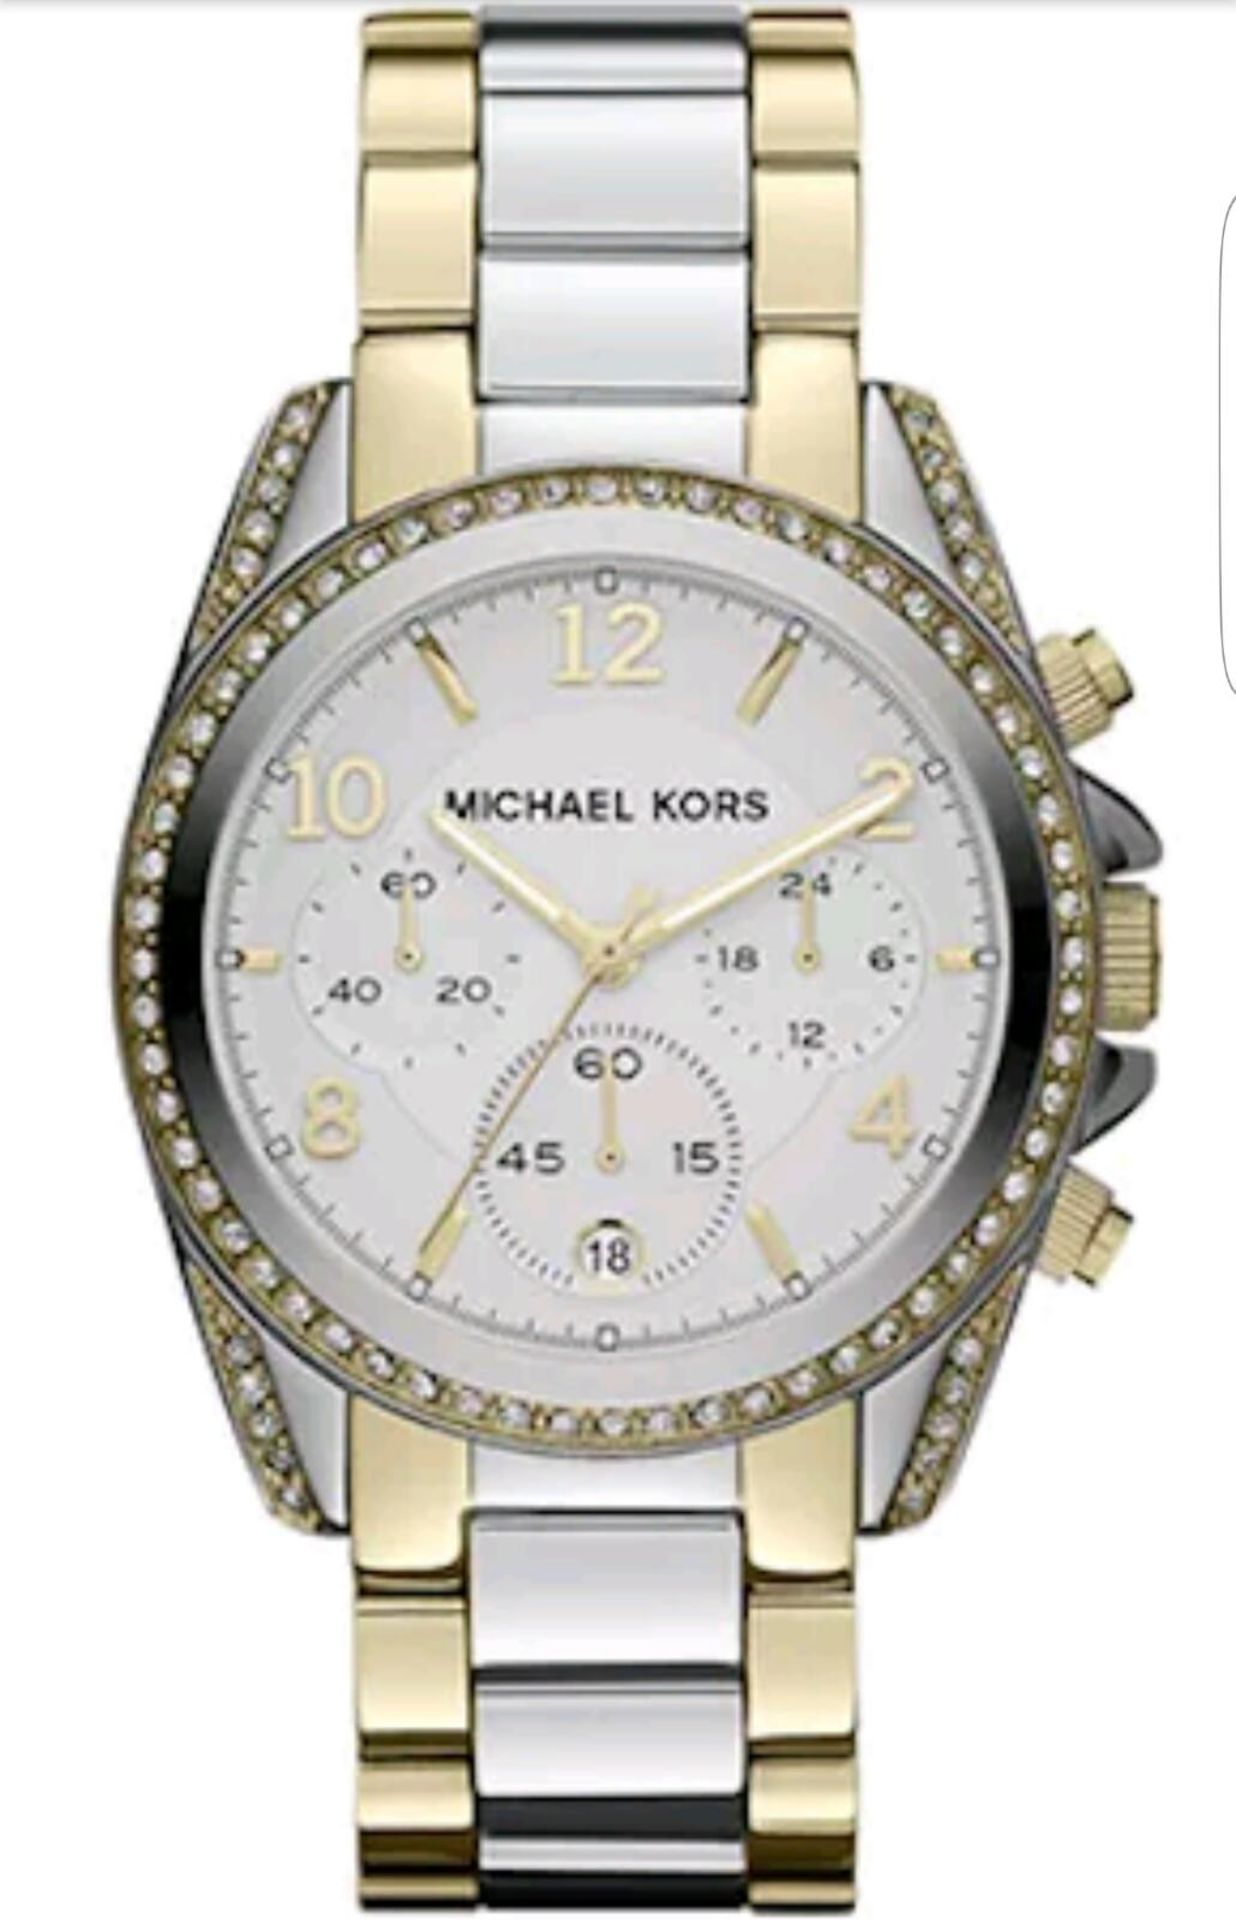 BRAND NEW LADIES MICHAEL KORS WATCH MK5685, COMPLETE WITH ORIGINAL PACKAGING AND MANUAL